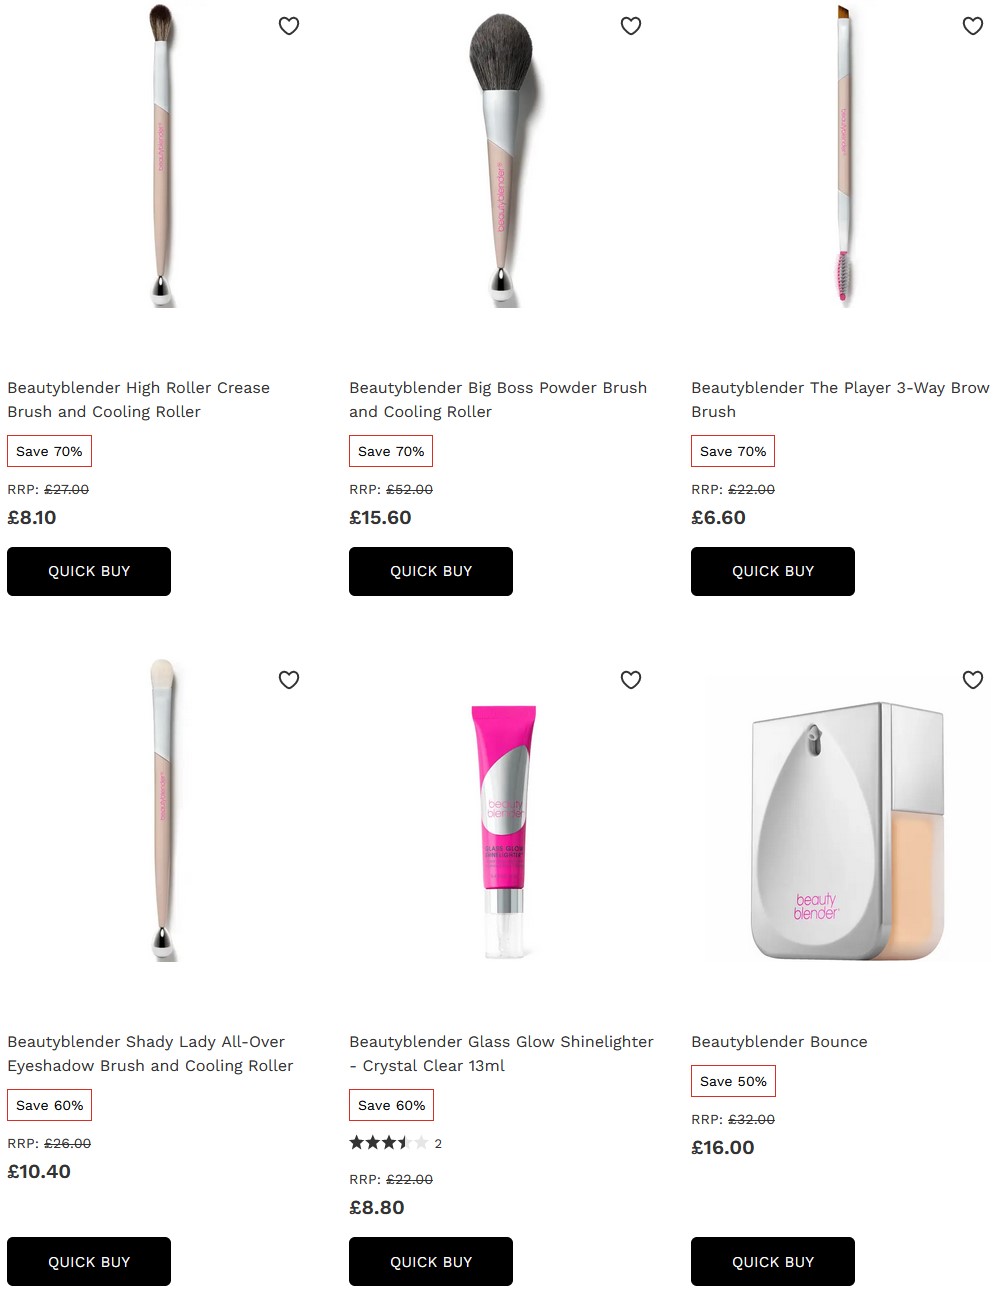 Up to 70% off beautyblender Lauder at Lookfantastic